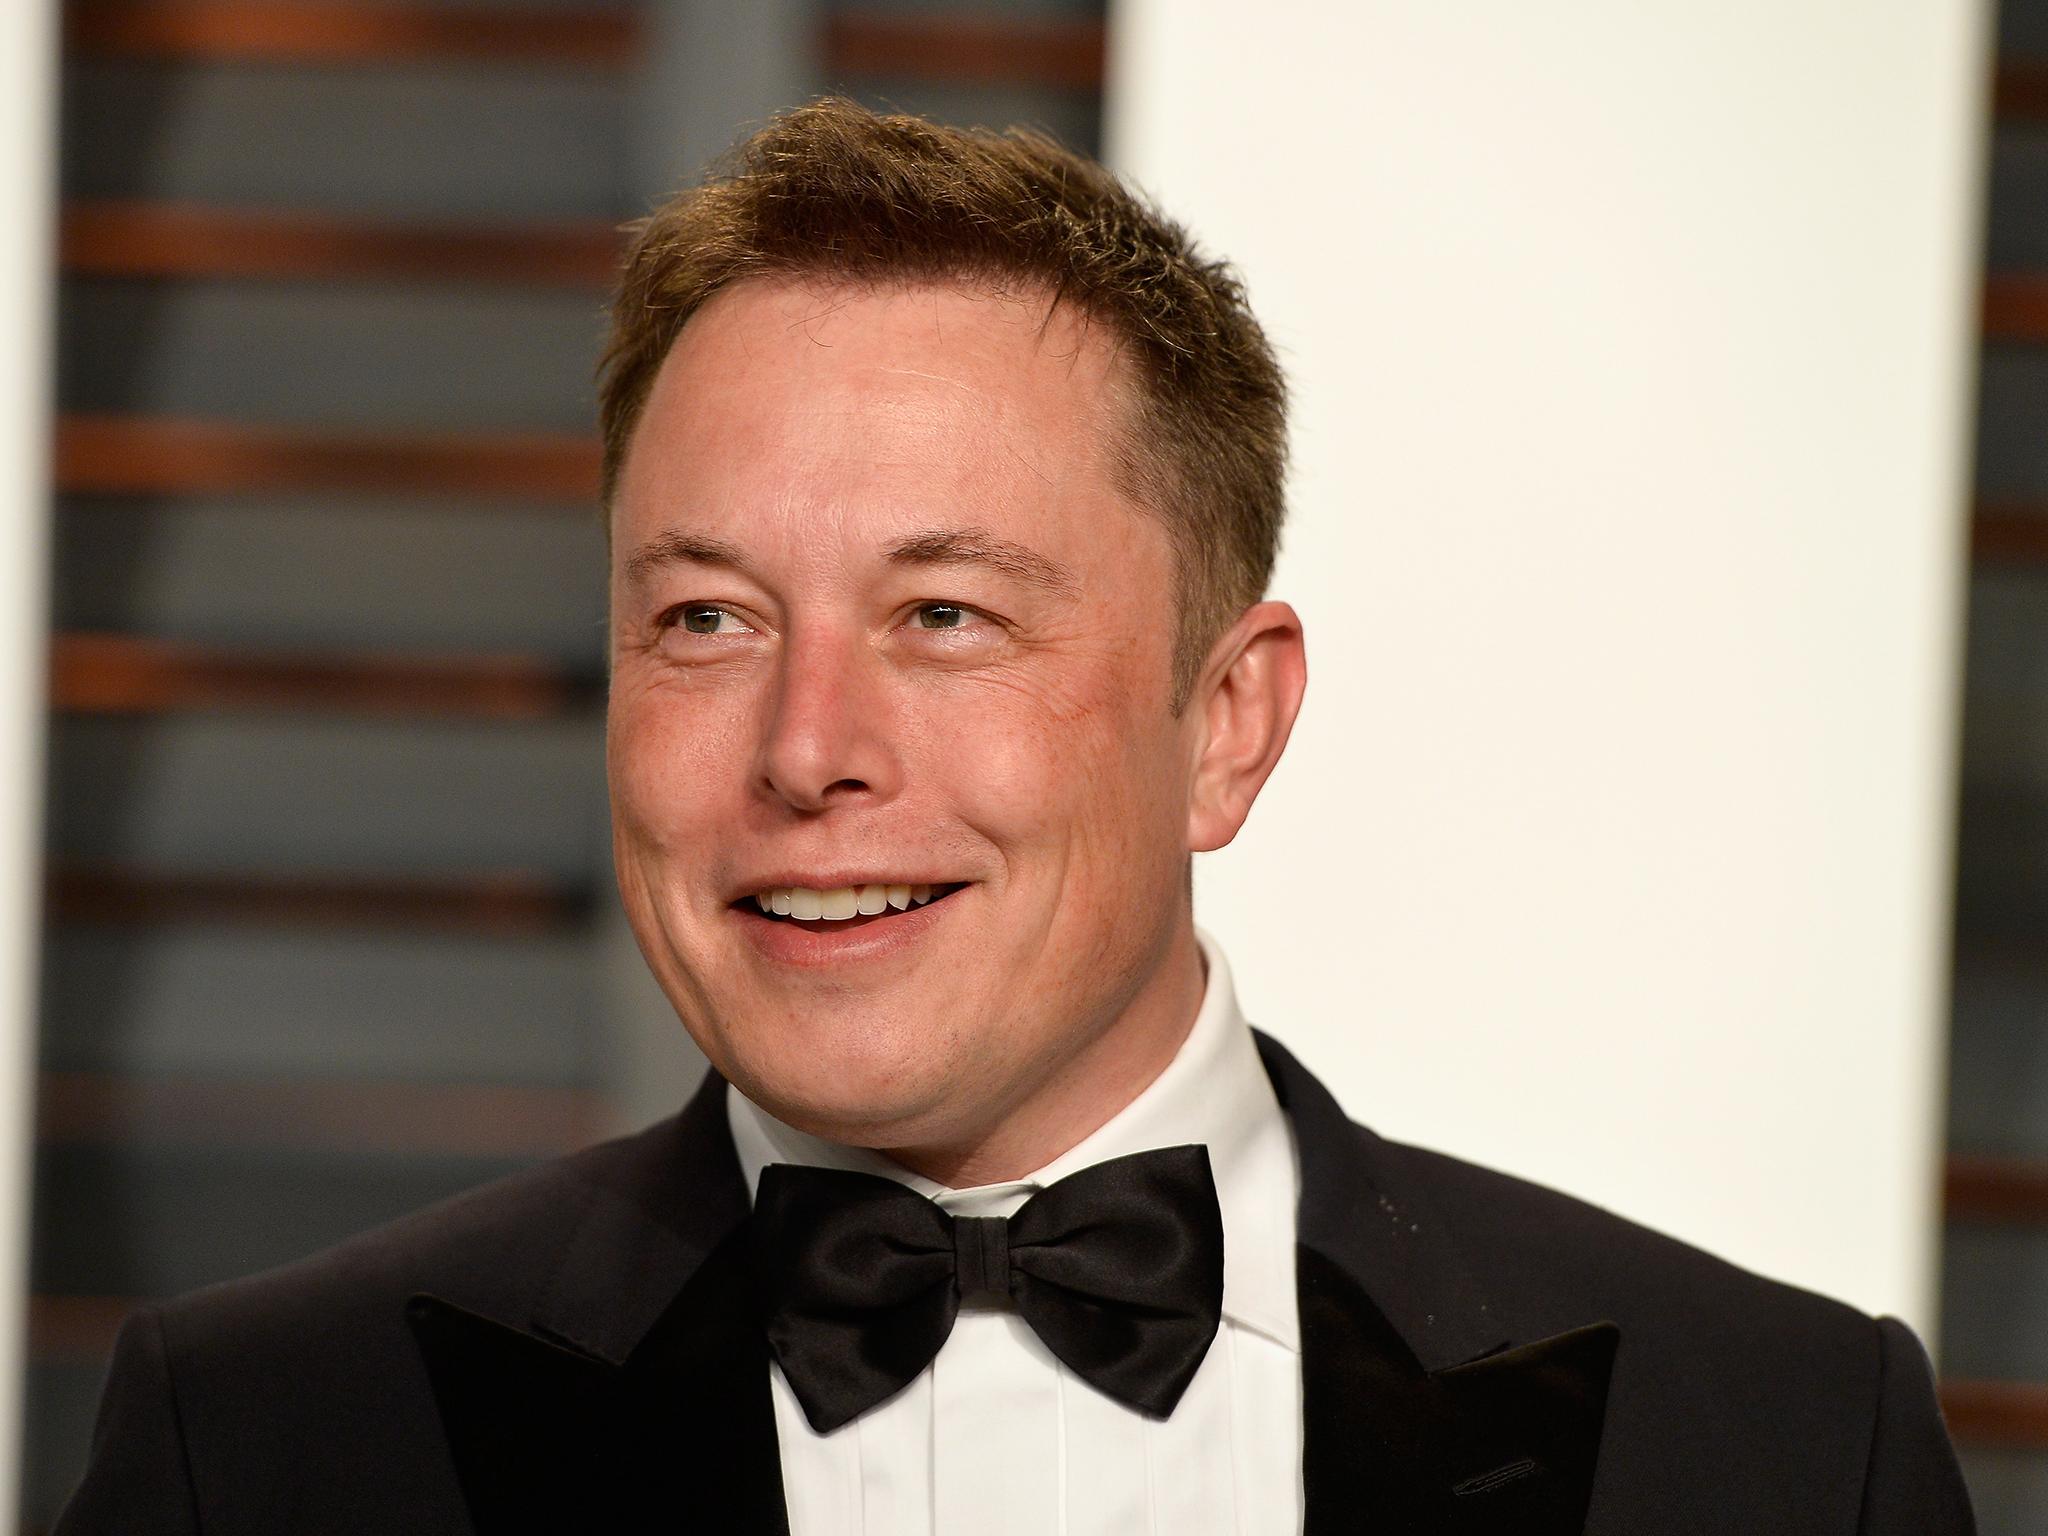 Elon Musk explains why living off a dollar a day convinced him he could